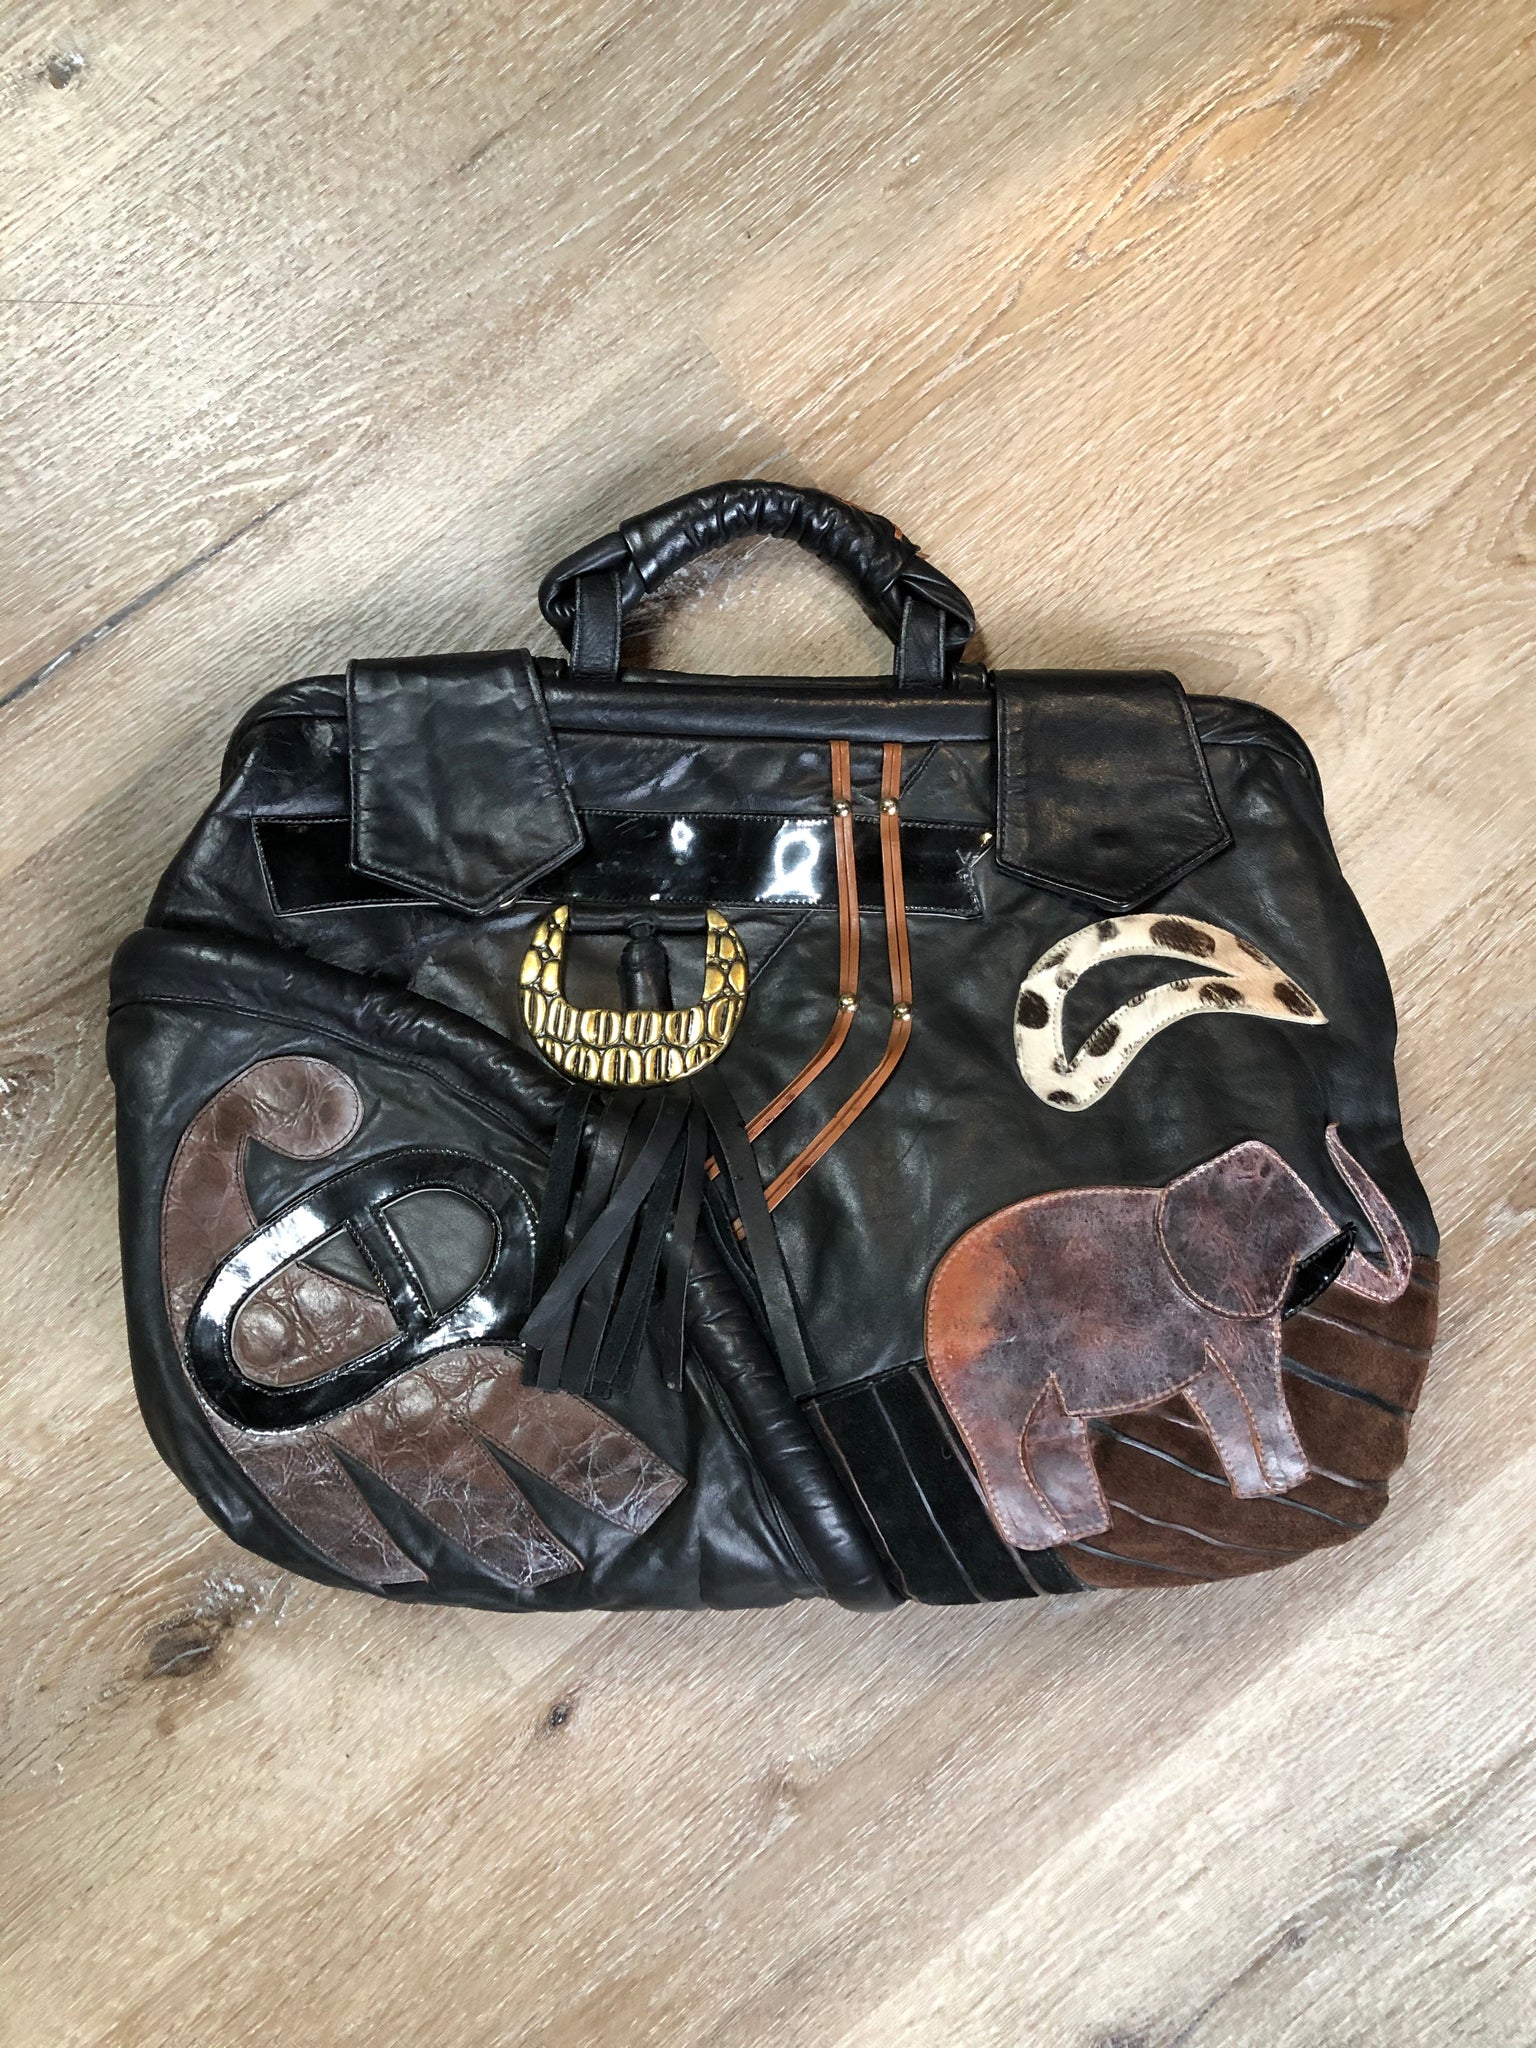 Designer vintage and upcycled handbags, purses and accessories